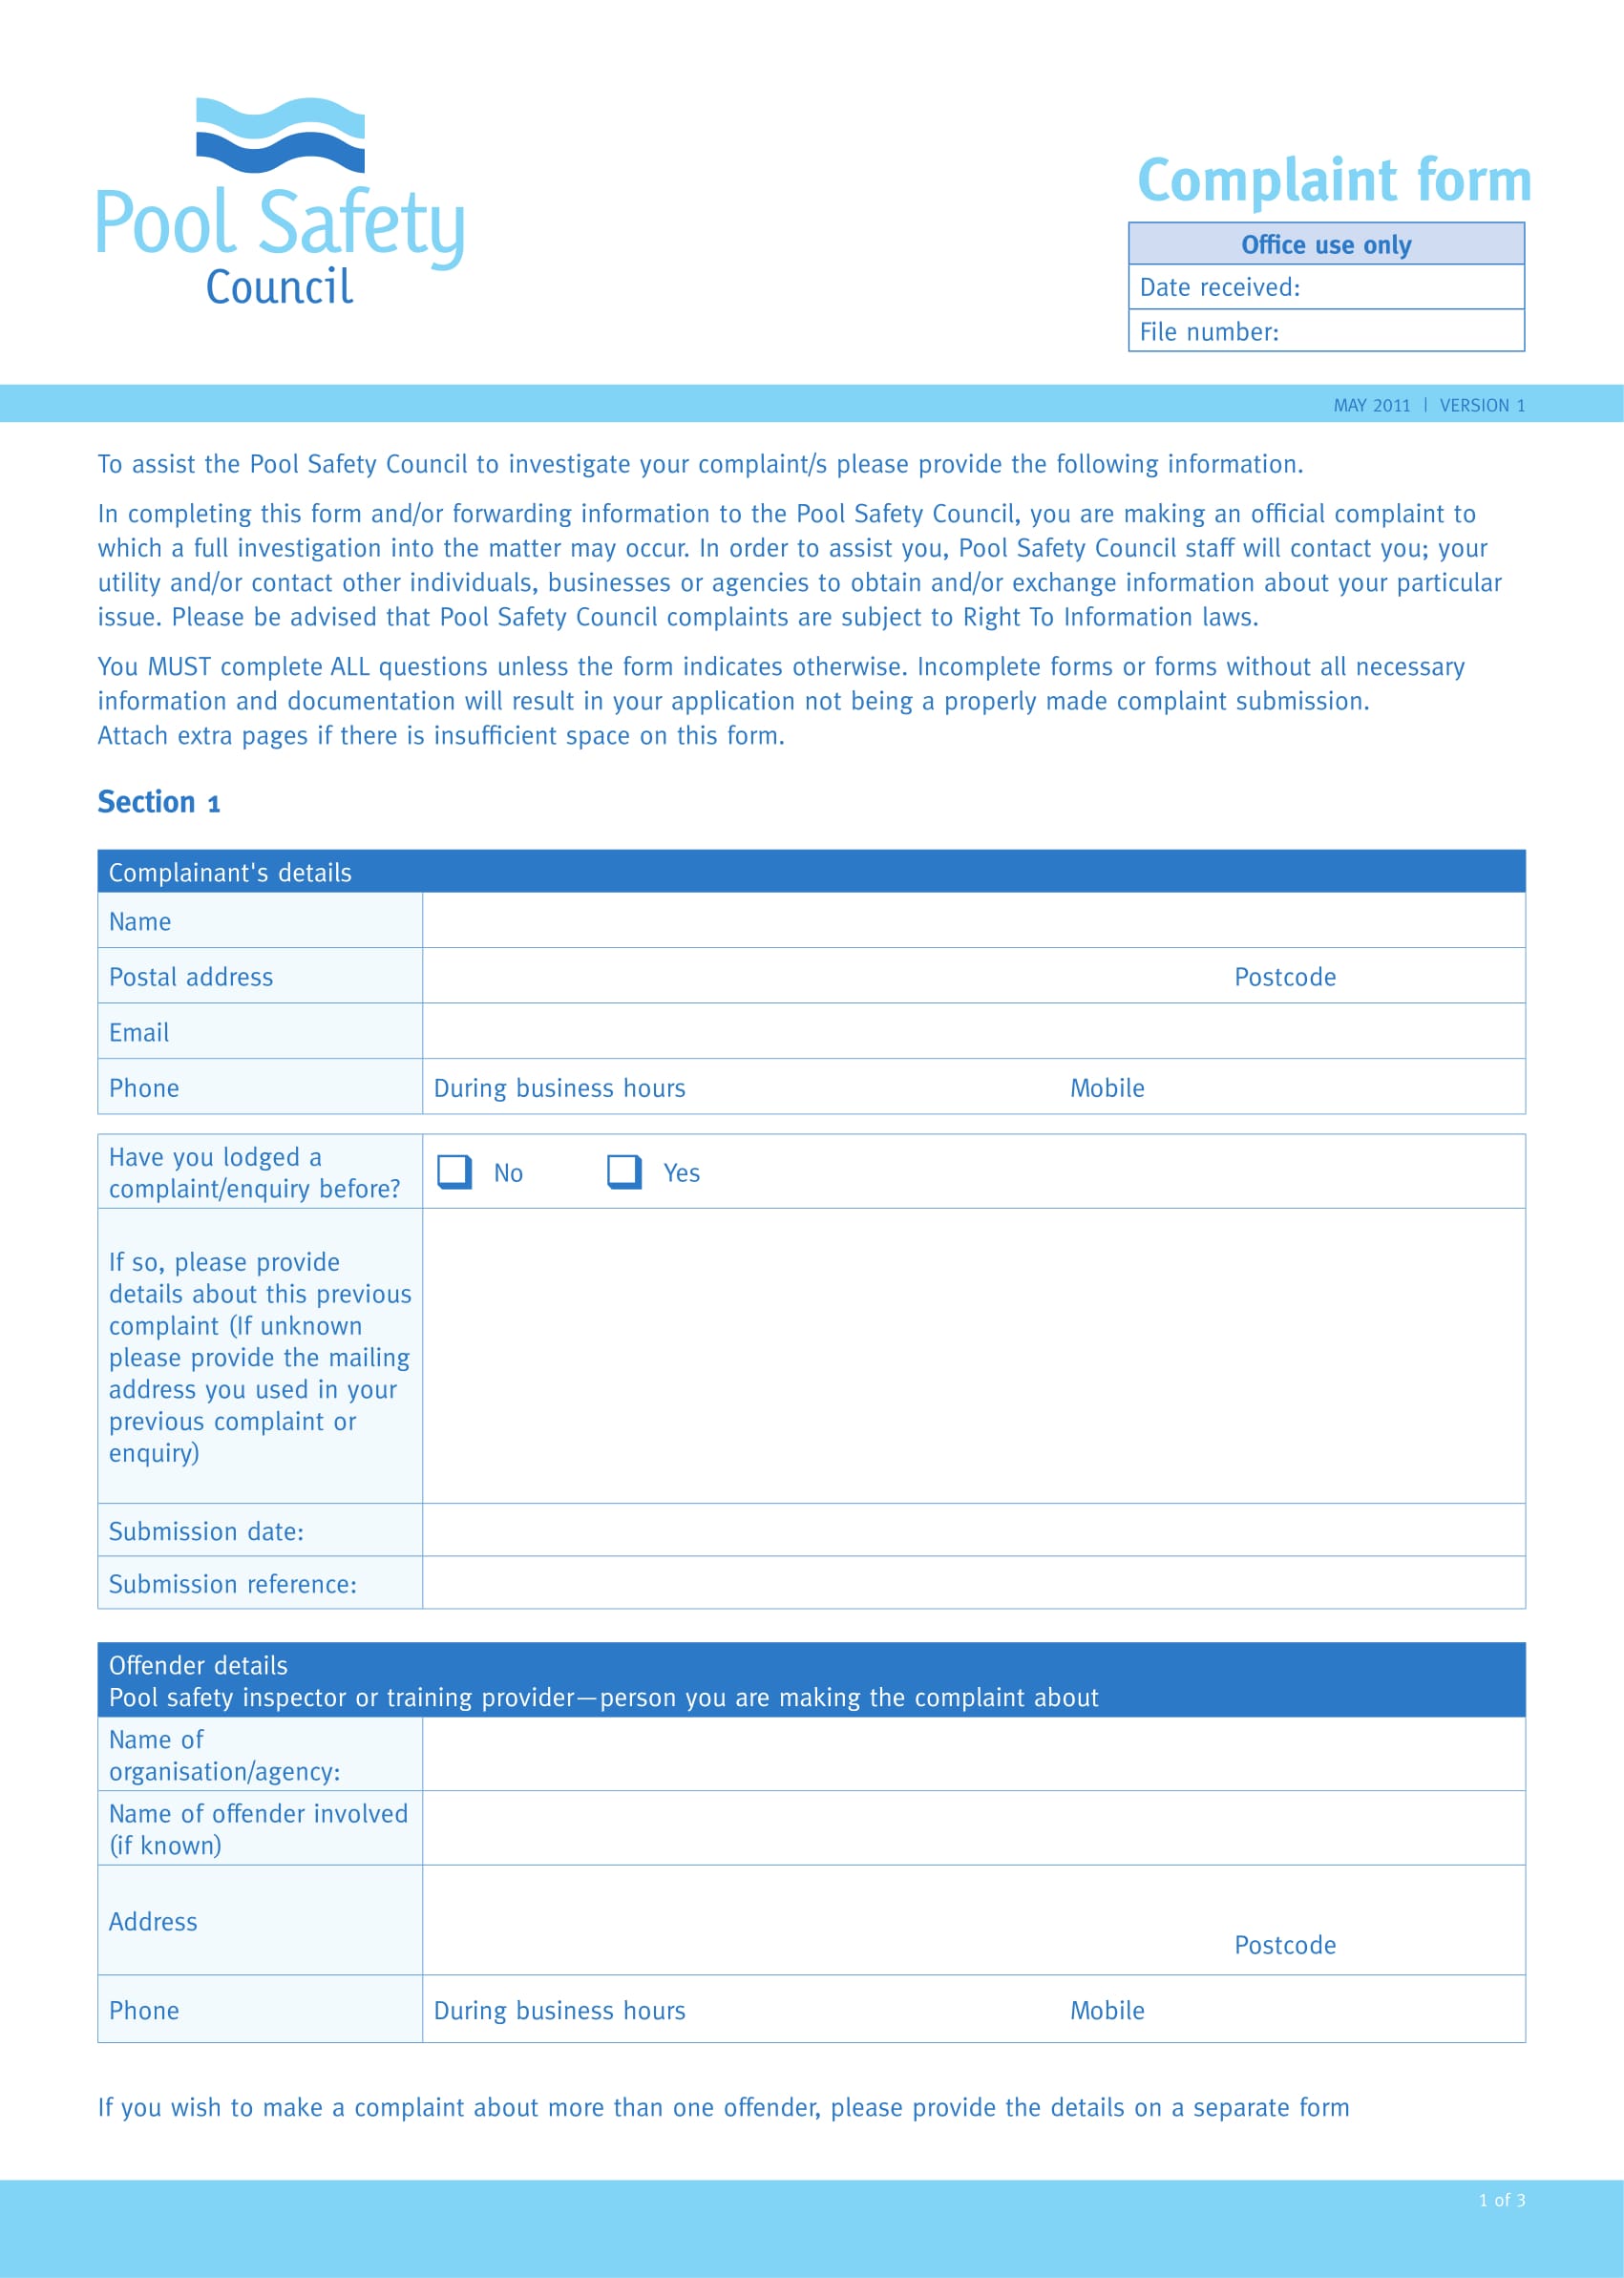 pool safety complaint form 1